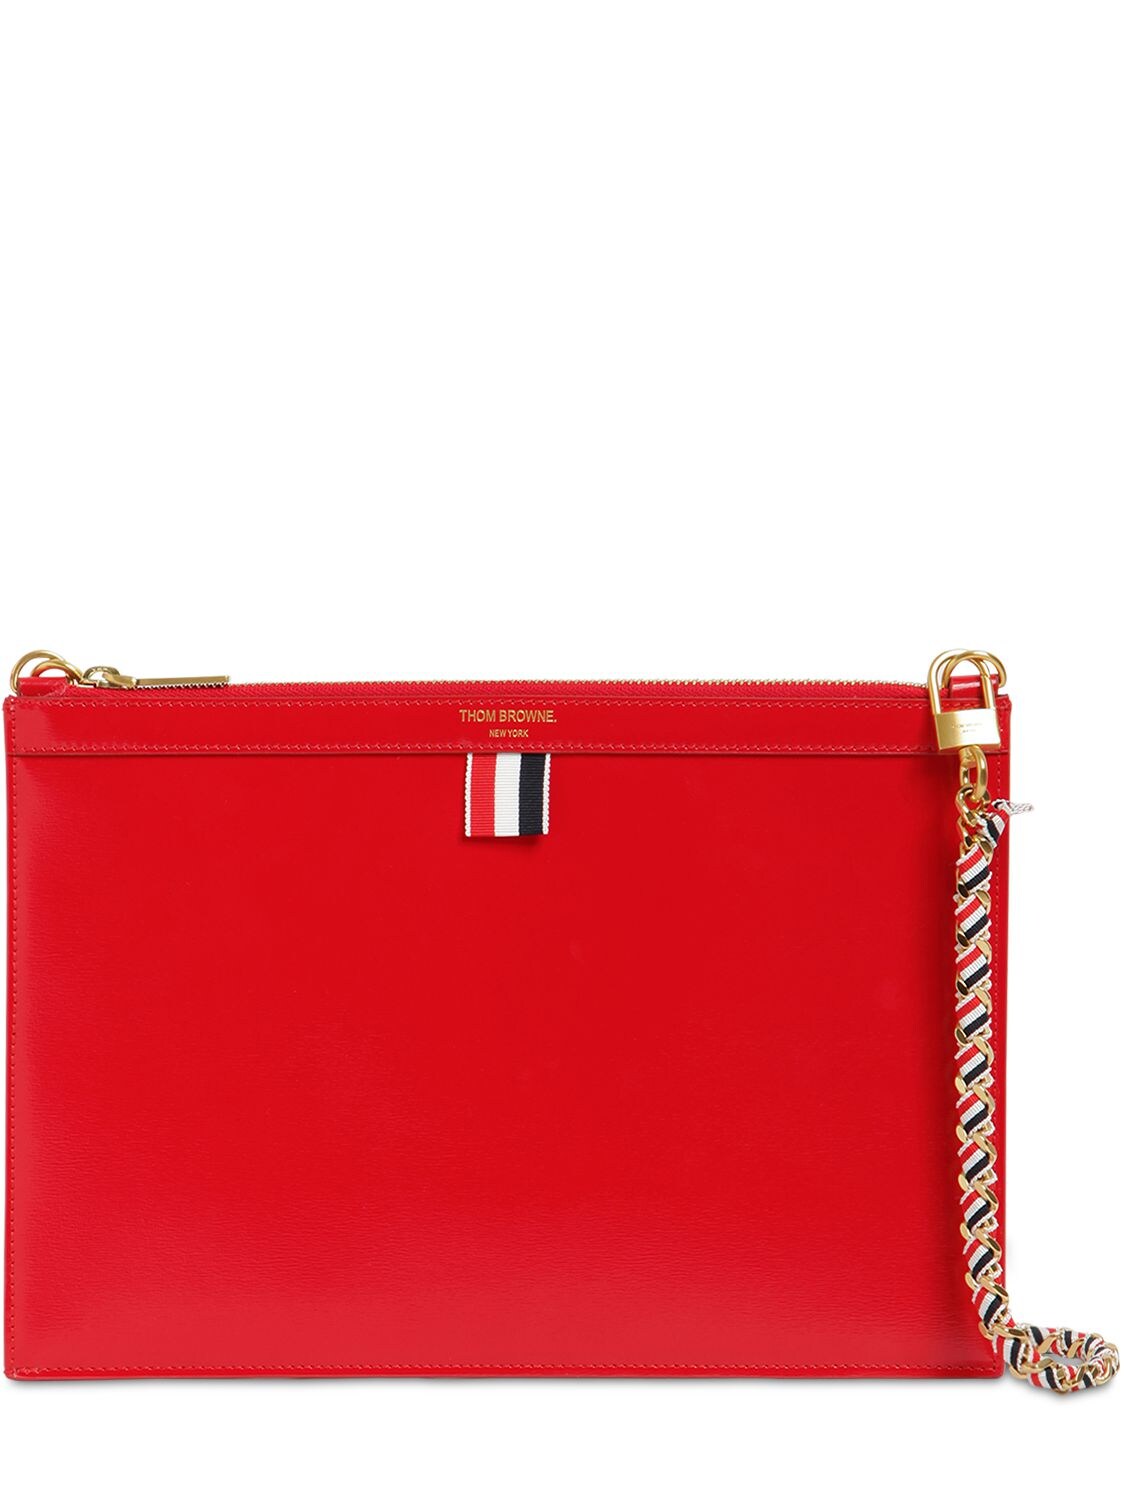 Thom Browne Small Leather Zip Clutch In Red